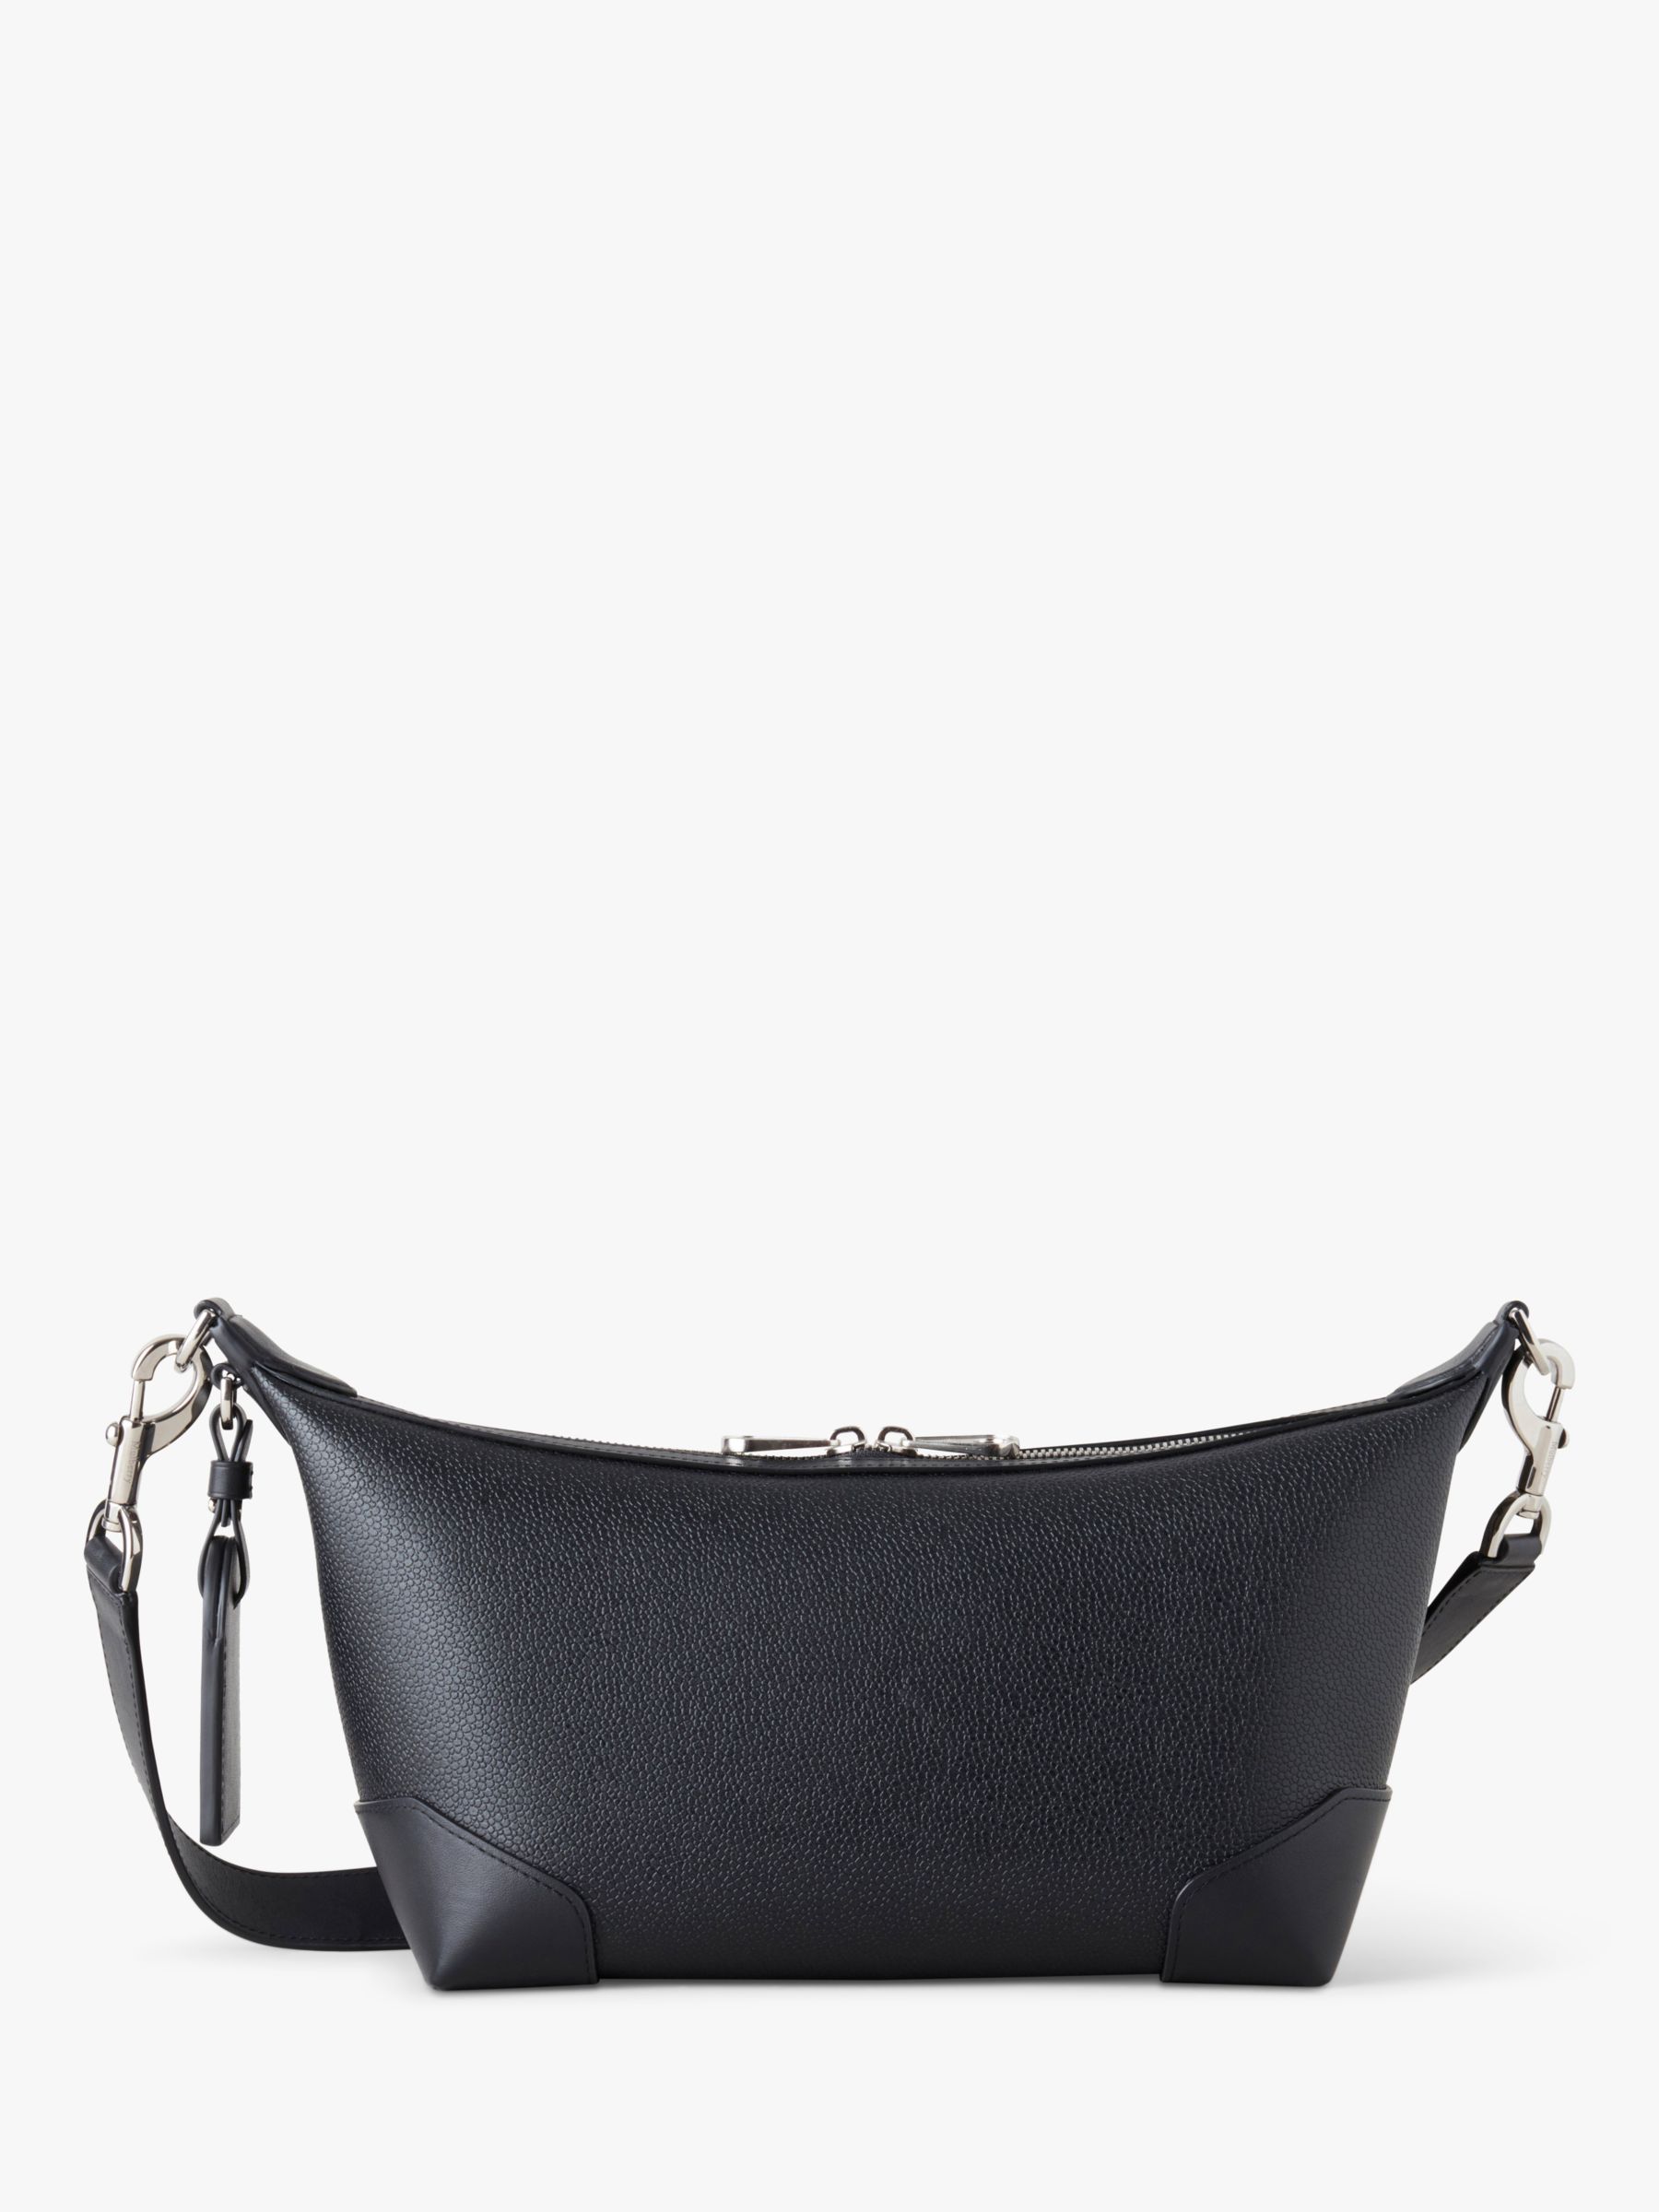 Mulberry Heritage Cross Body Clipper Bag, Black at John Lewis & Partners